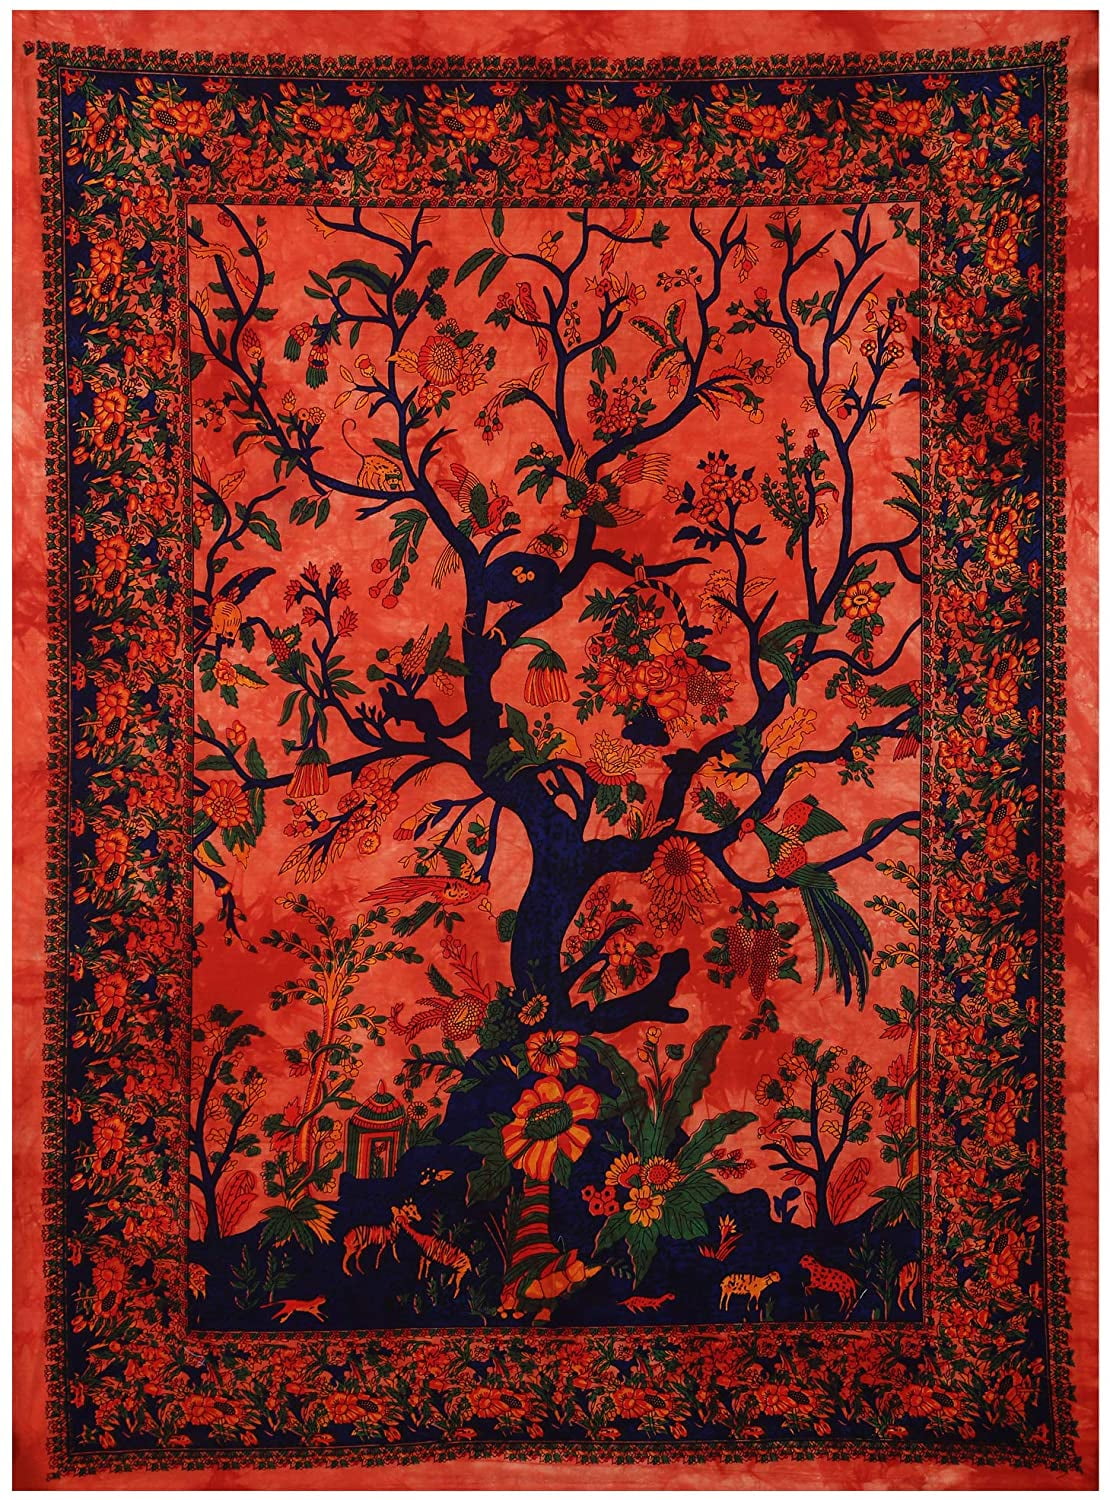 Indian Dry Tree Small Tapestry Poster Wall Hanging Door Decor Hippie Throw Art